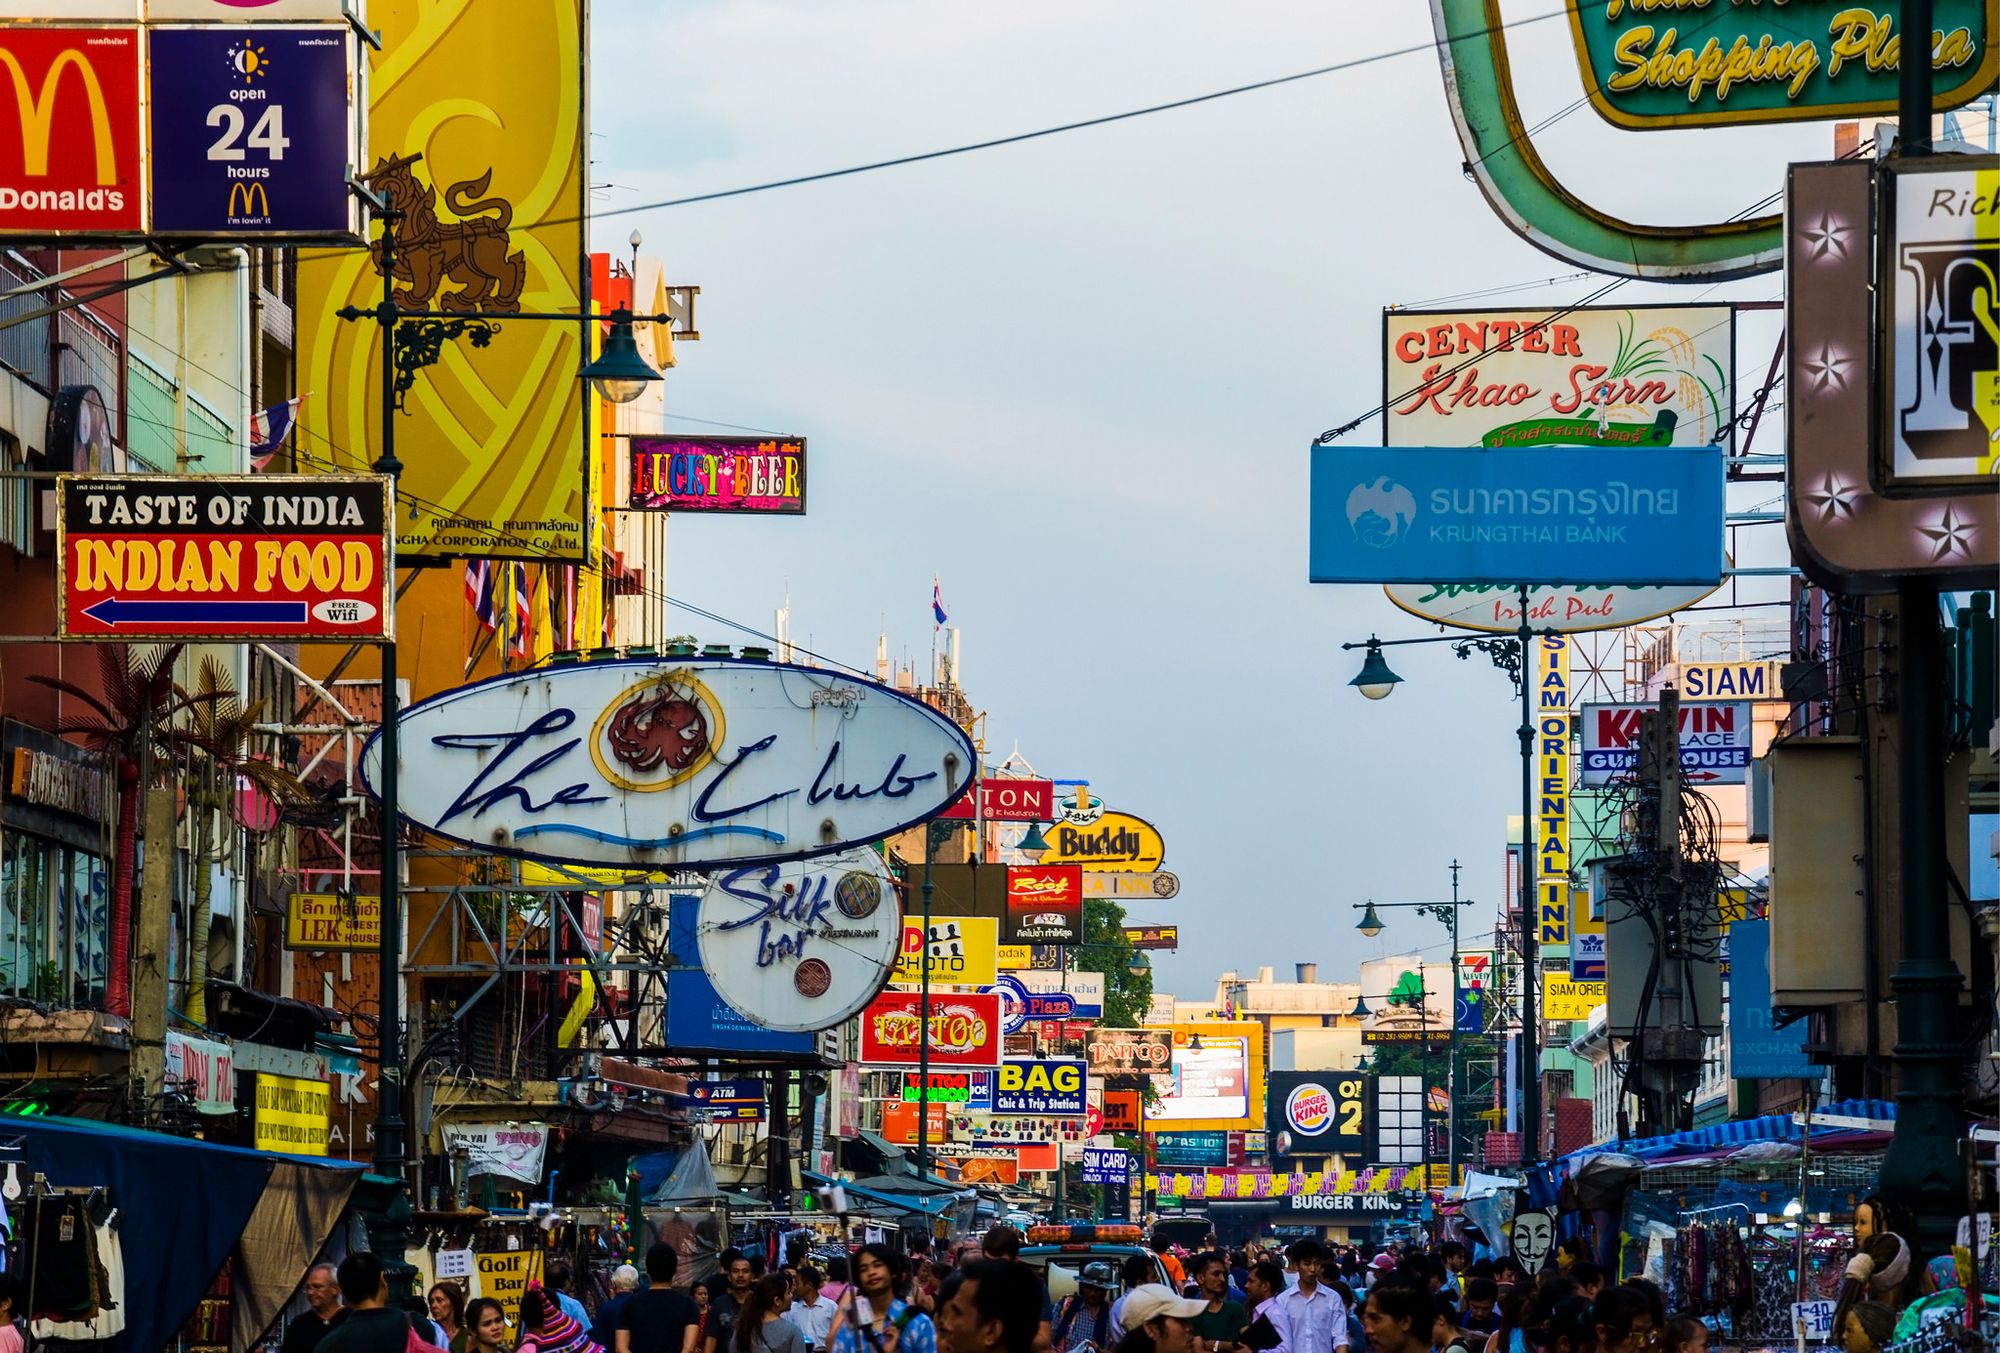 Our hints for accommodations in Bangkok - the City of Angels